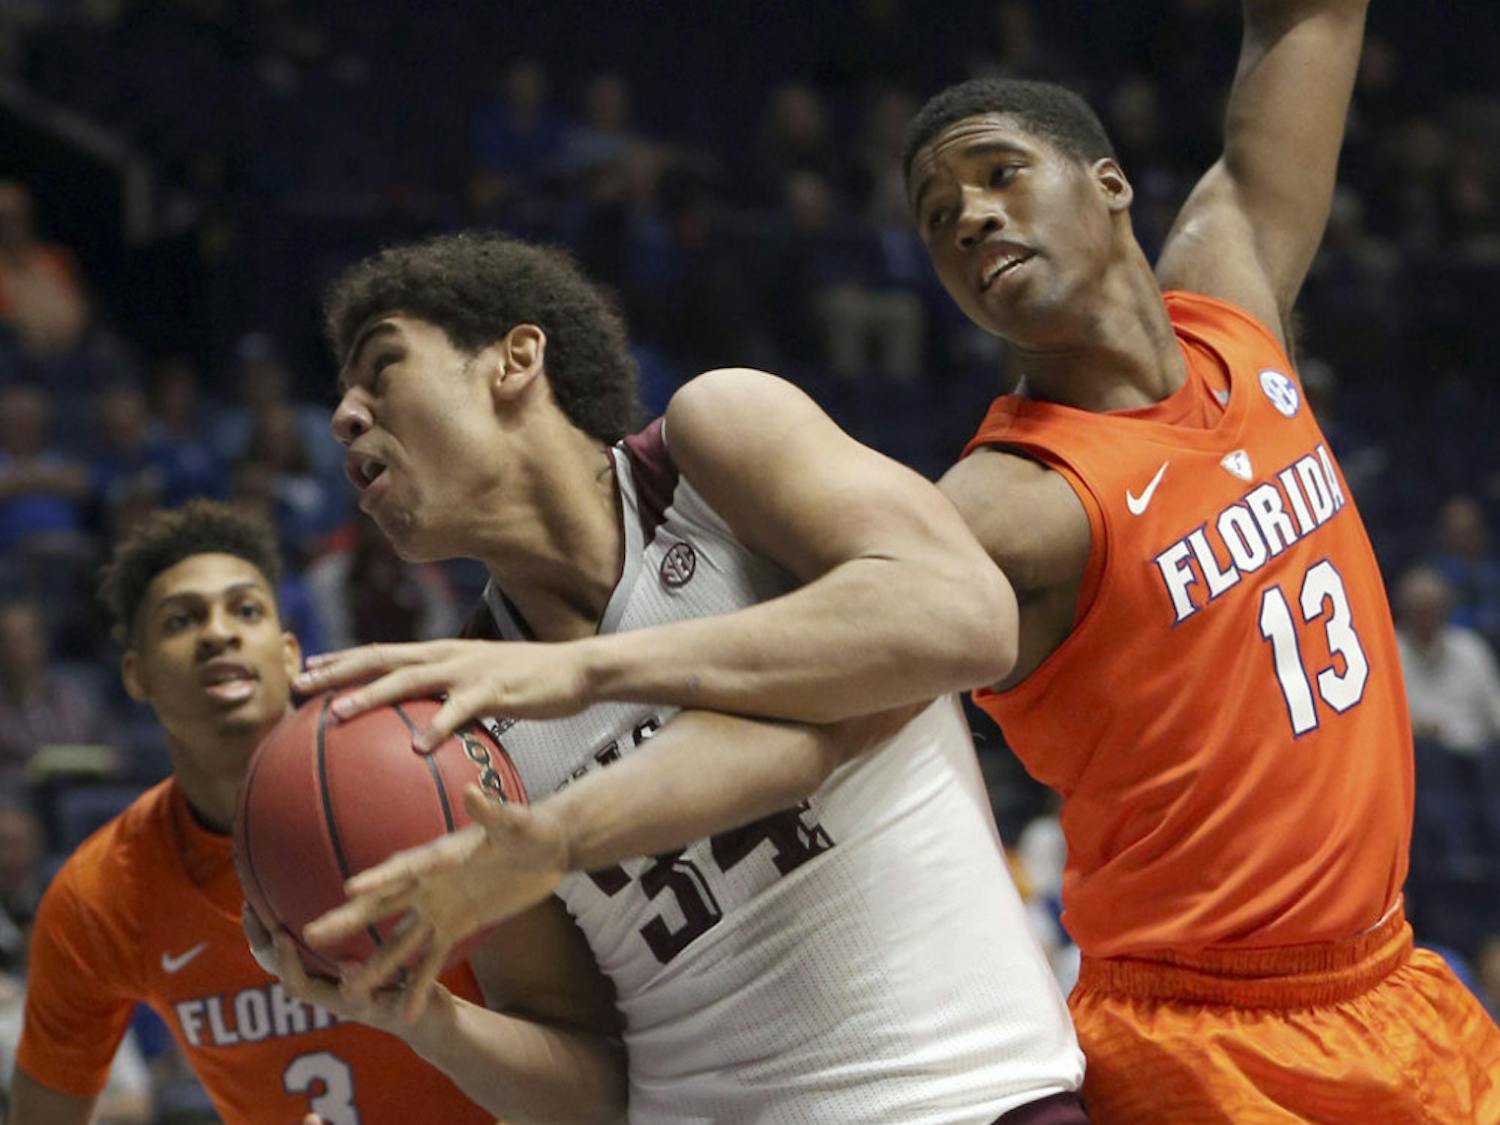 Texas A&amp;M's Tyler Davis (34) gets tangled up with Florida's Kevarrius Hayes (13) during the first half of an NCAA college basketball game in the Southeastern Conference tournament in Nashville, Tenn., Friday, March 11, 2016. (AP Photo/John Bazemore)